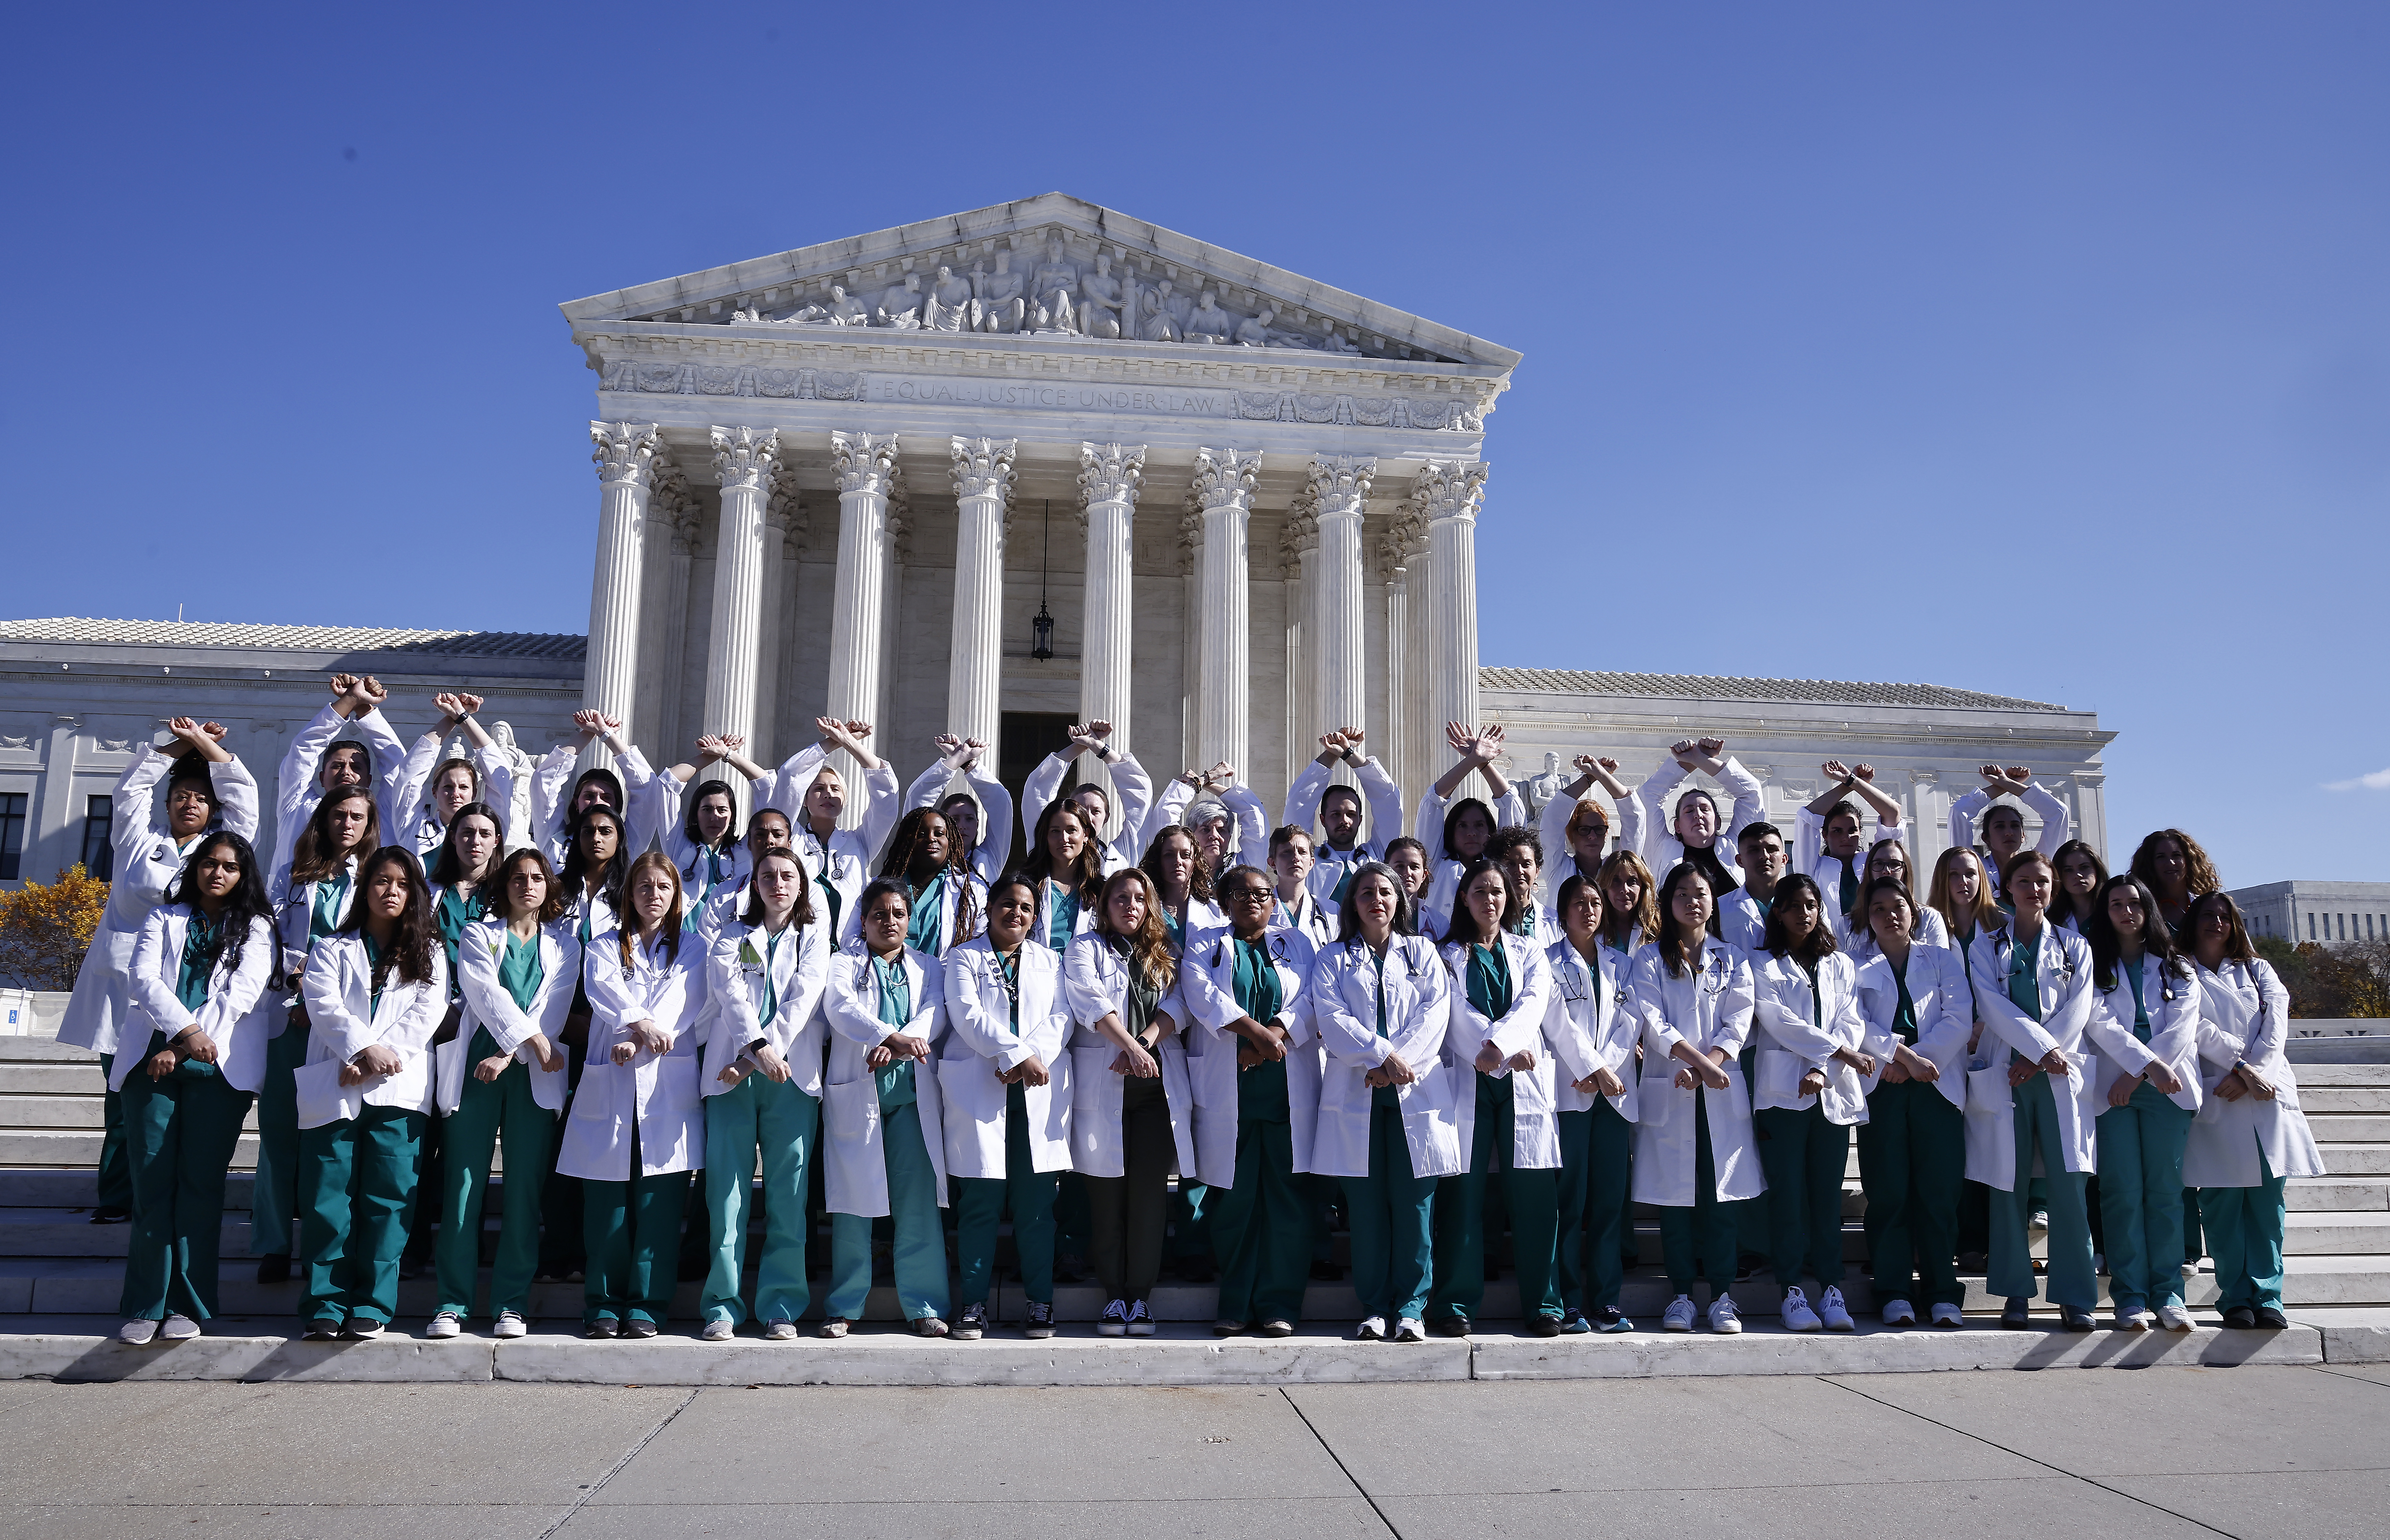 WASHINGTON, DC - NOVEMBER 03: Doctors from across the U.S. stop at the U.S. Supreme Court during an action to protect abortion access and demand an end to the current and future criminalization of providers who perform lifesaving abortion care on November 03, 2022 in Washington, DC. (Photo by Paul Morigi/Getty Images for Doctors for Abortion Action)